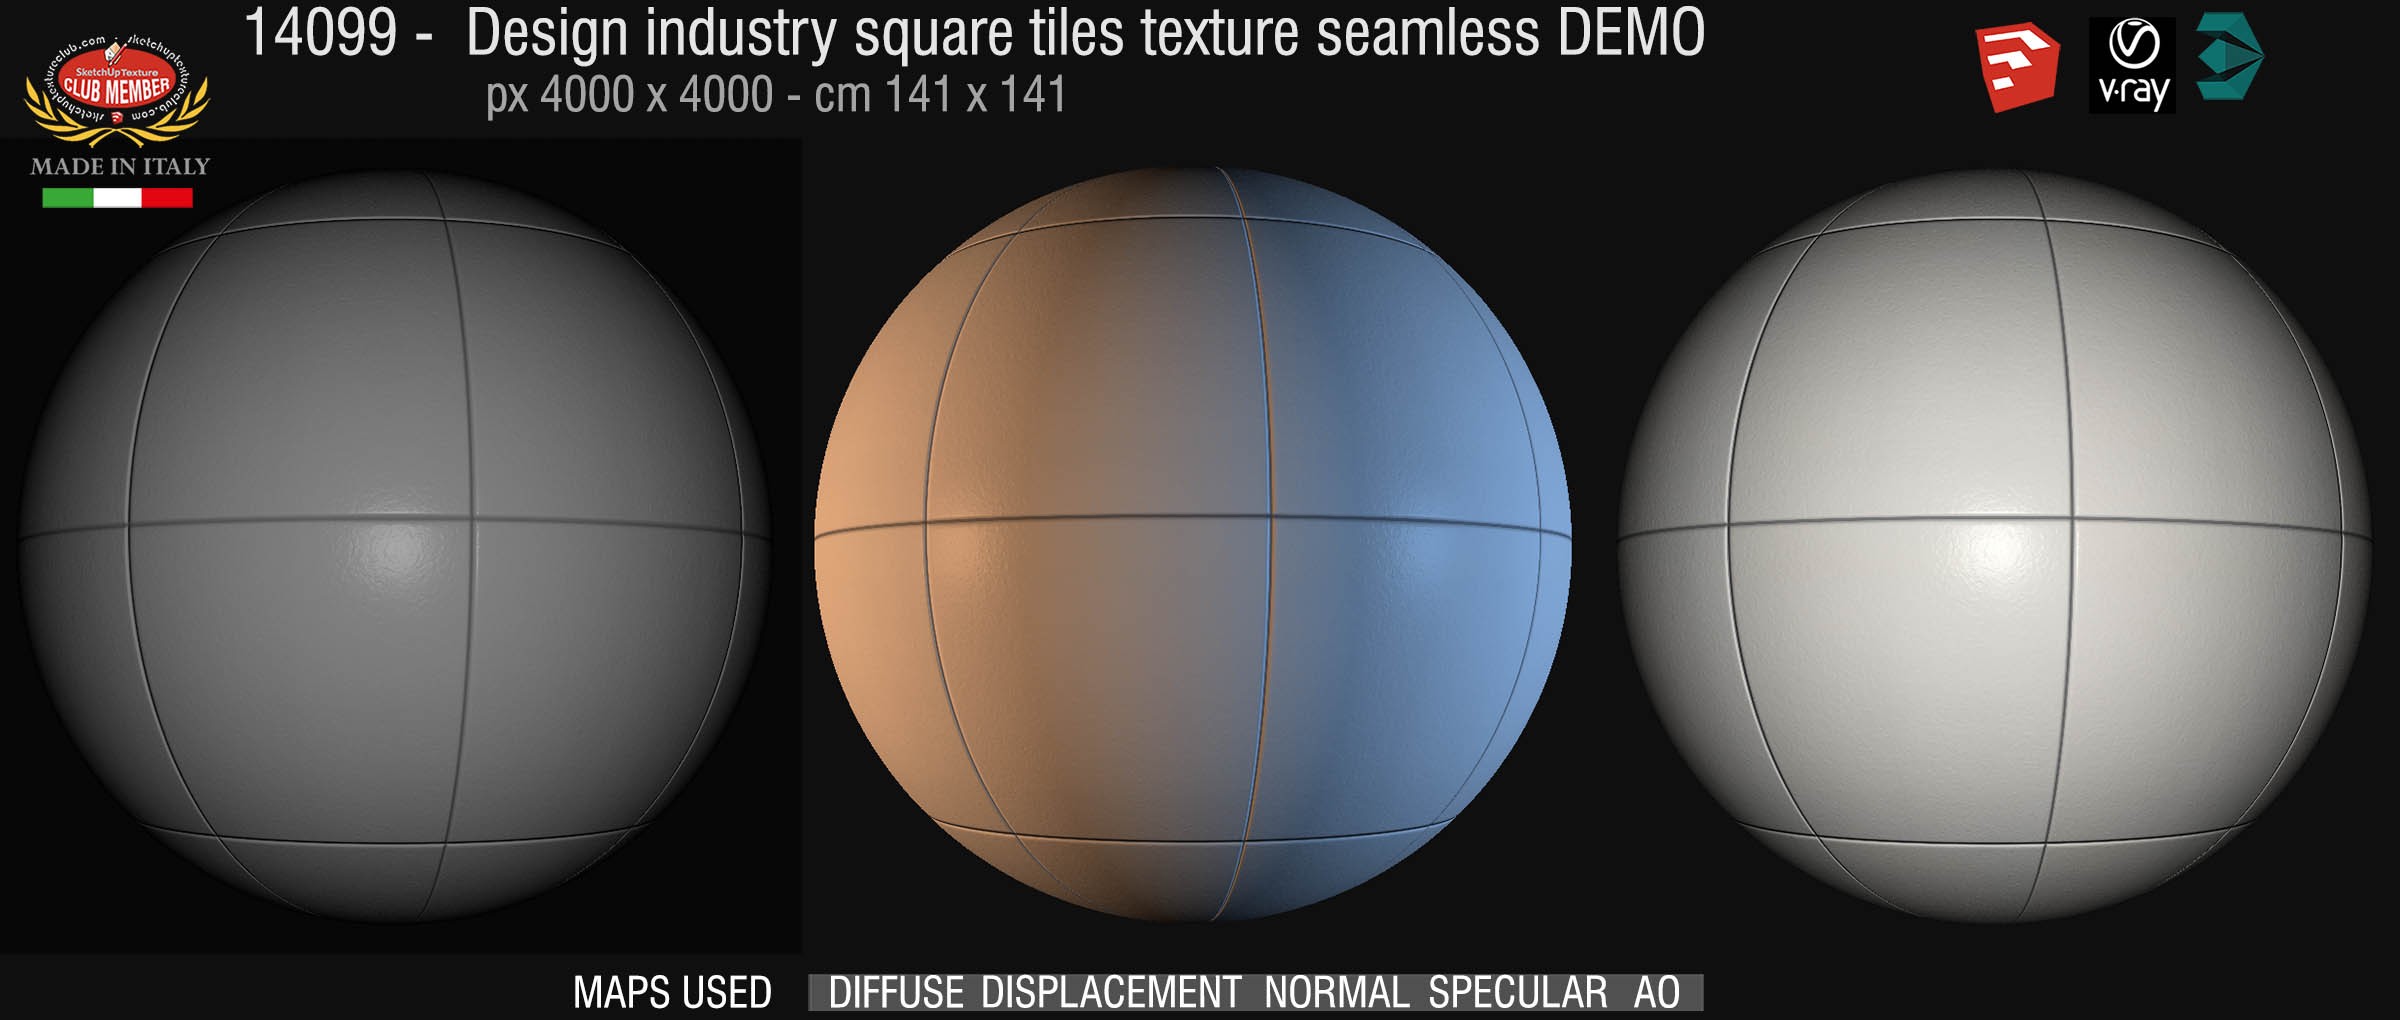 14099 Design industry square tile texture seamless + maps DEMO